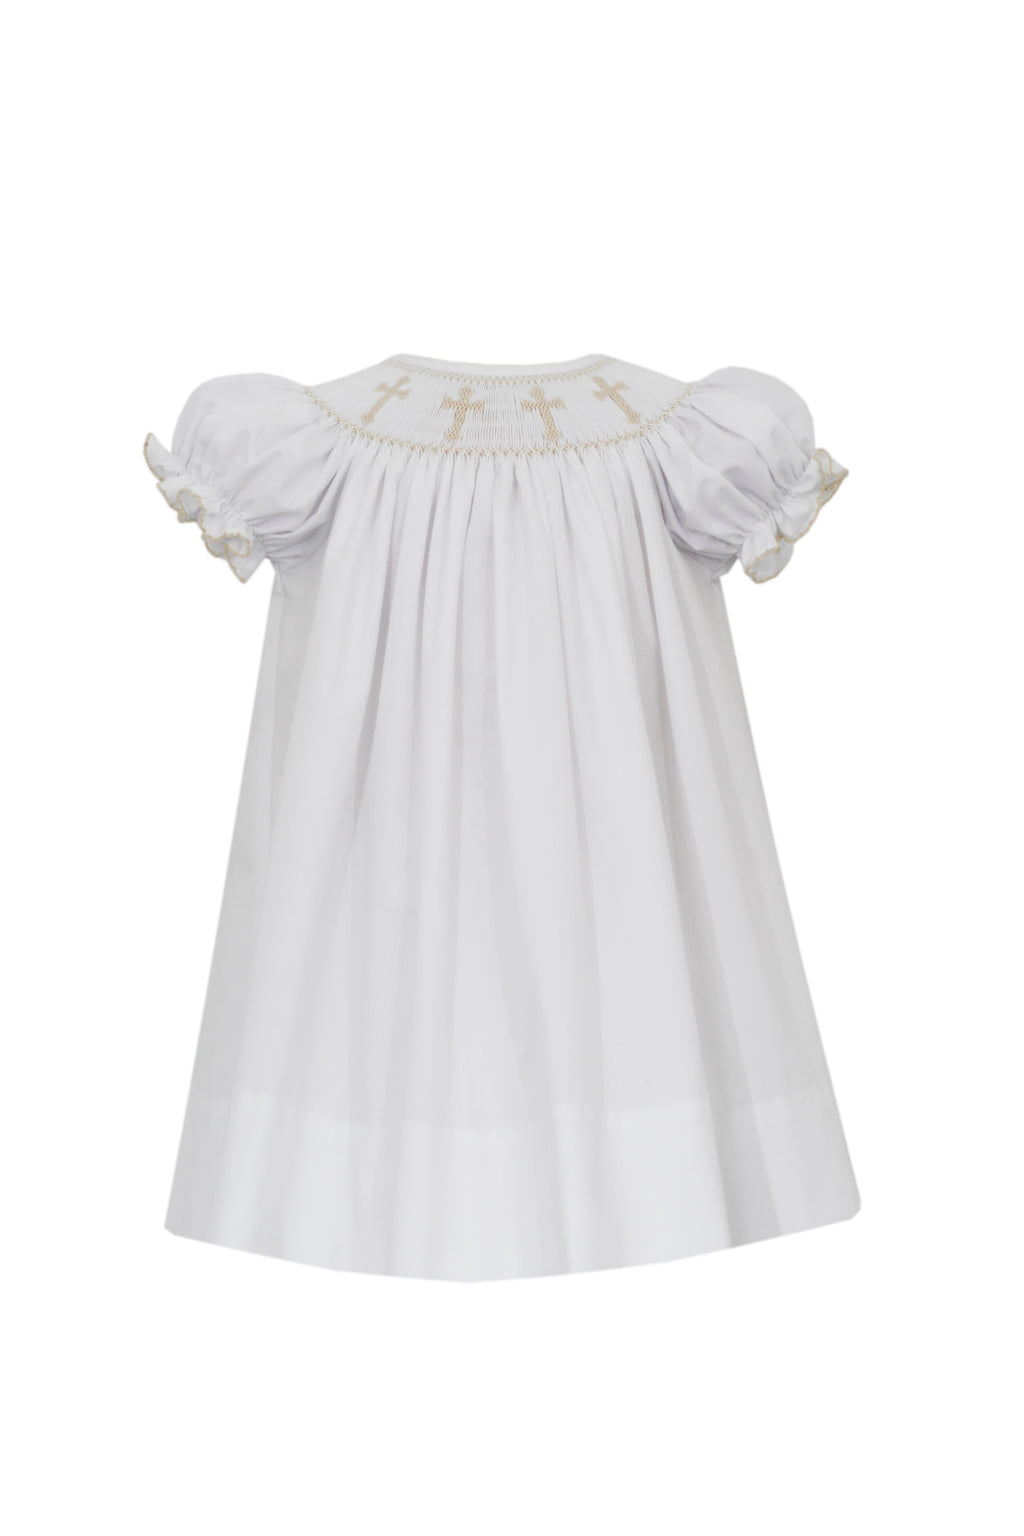 White with Ivory Crosses Smocked Bishop Dress